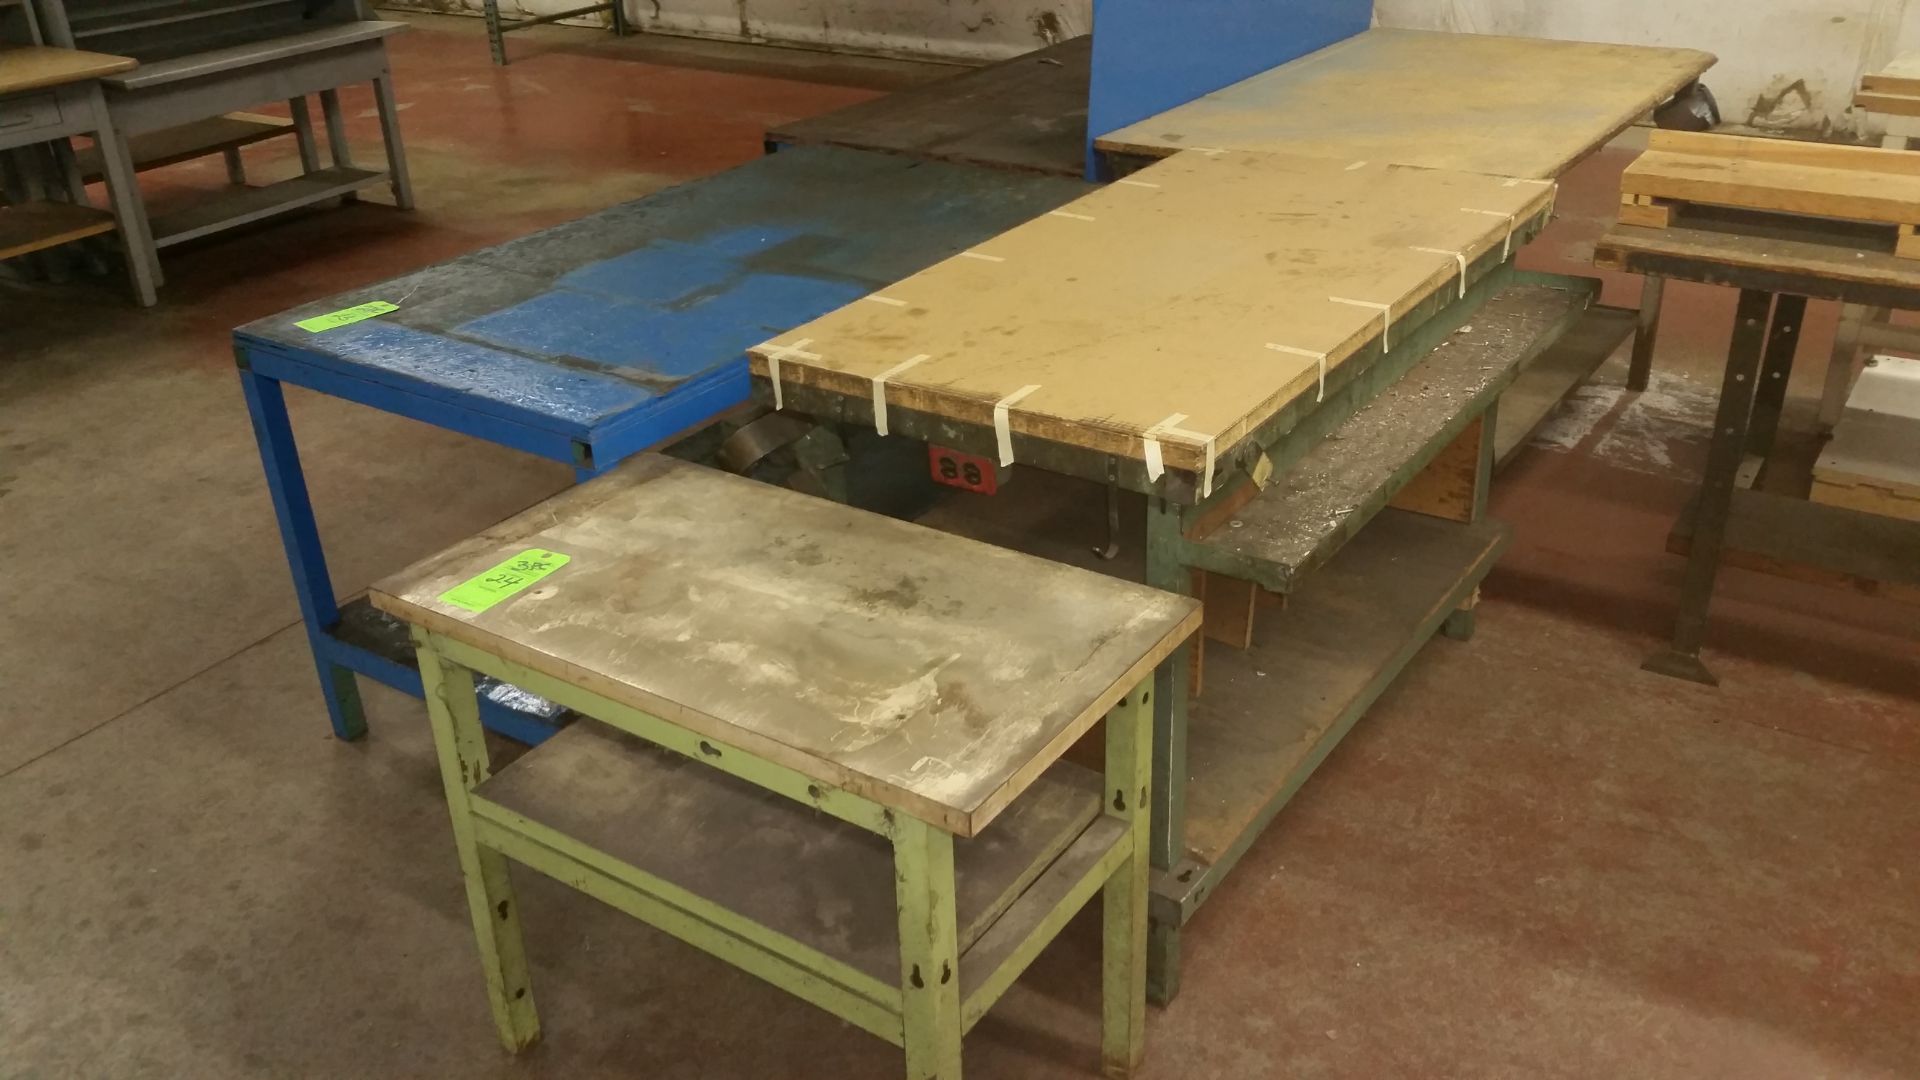 (3) WORK BENCHES/TABLES